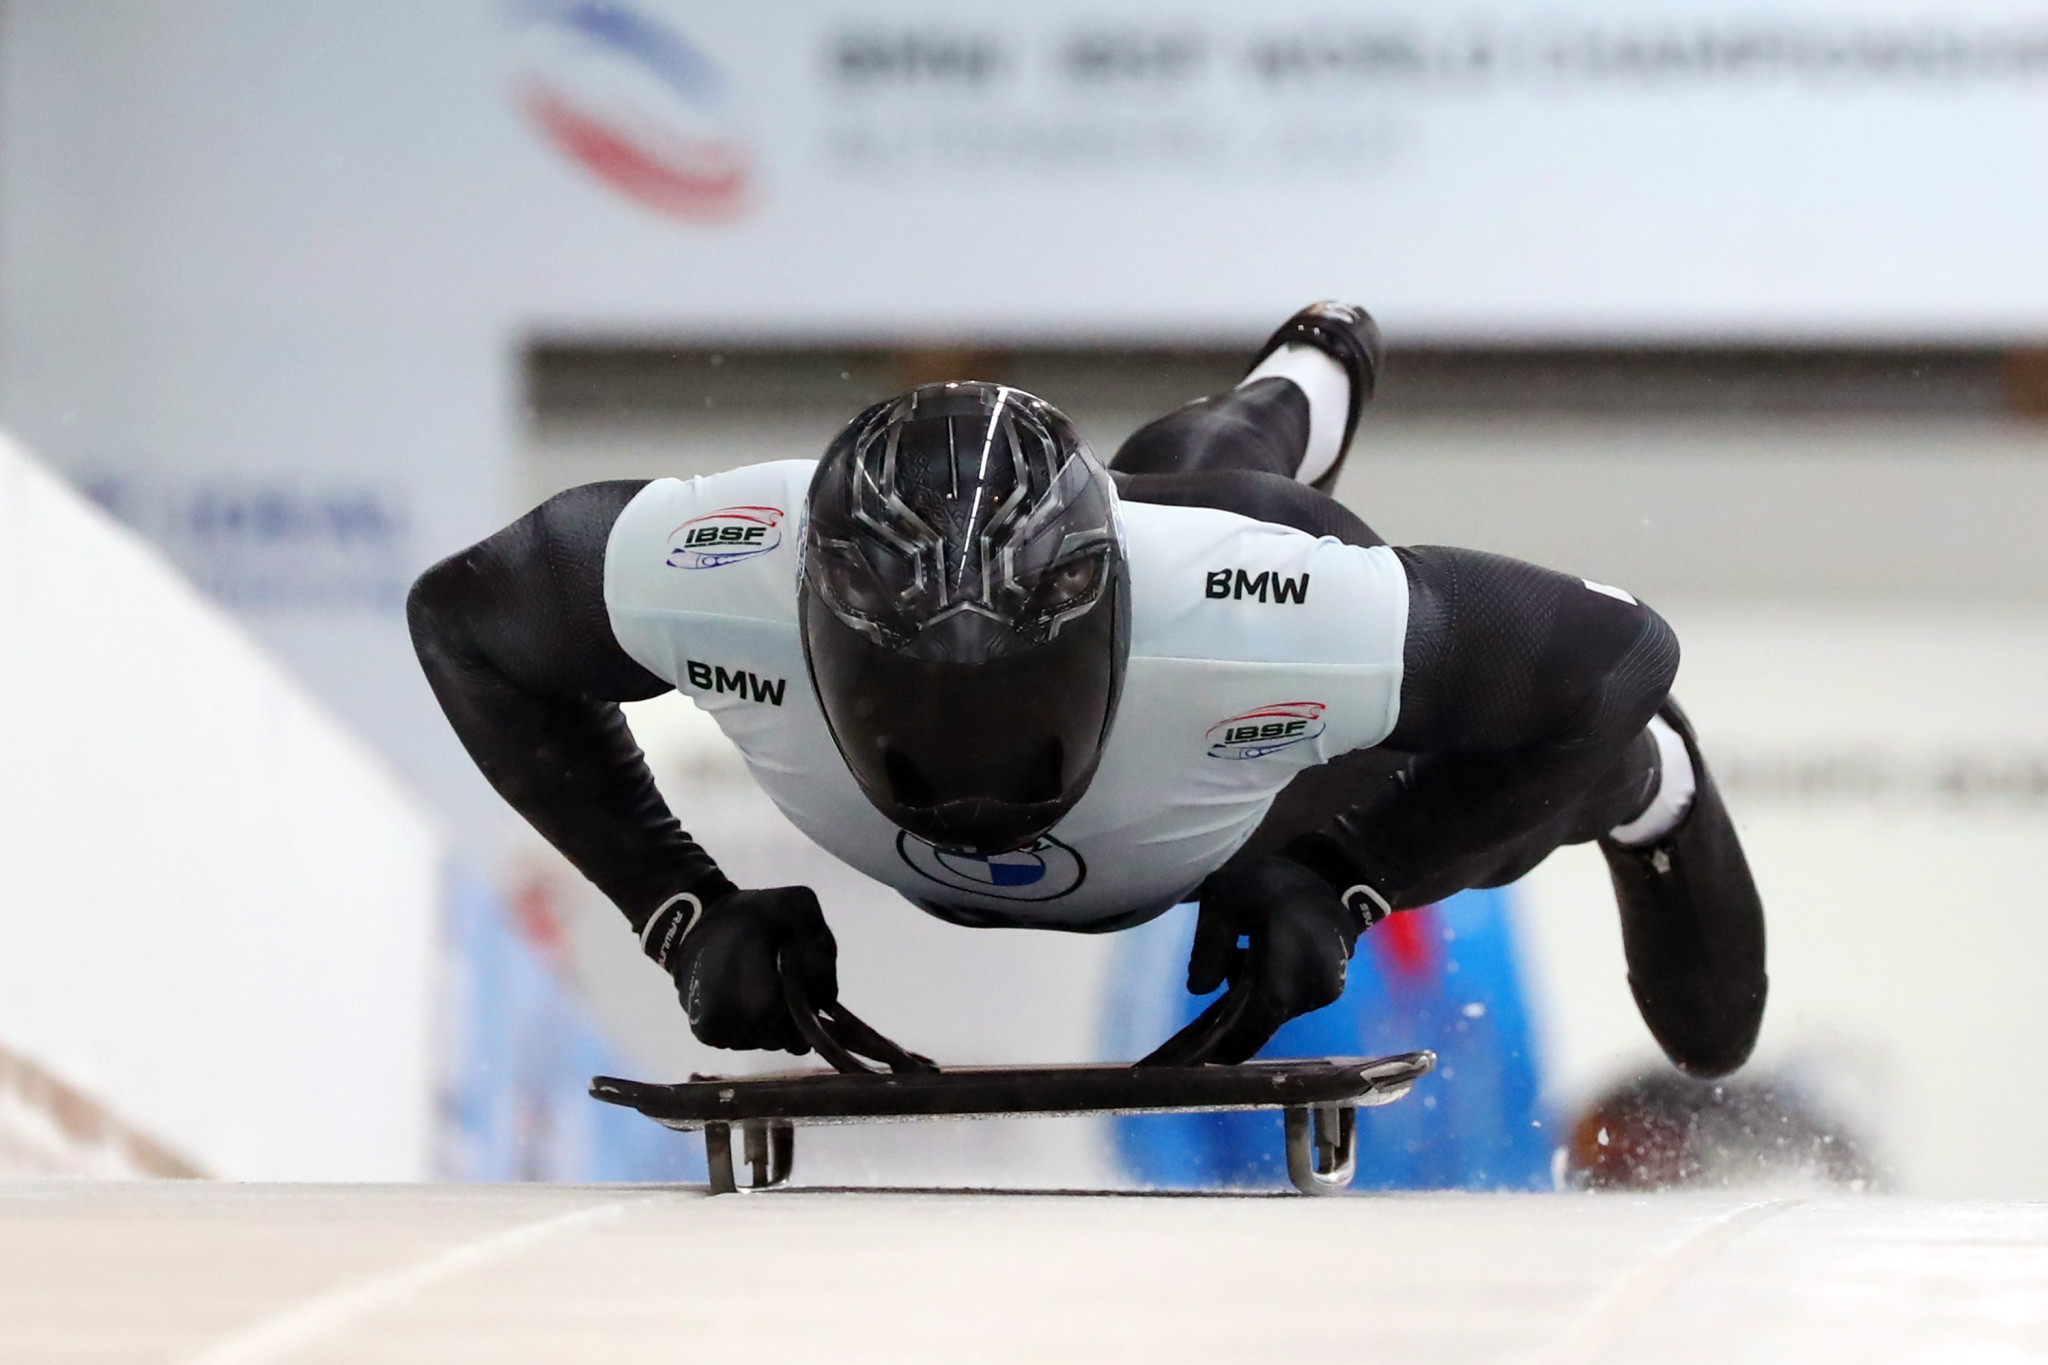 Frimpong seeks Ghanaian athlete to compete with him in mixed team skeleton at Milan Cortina 2026